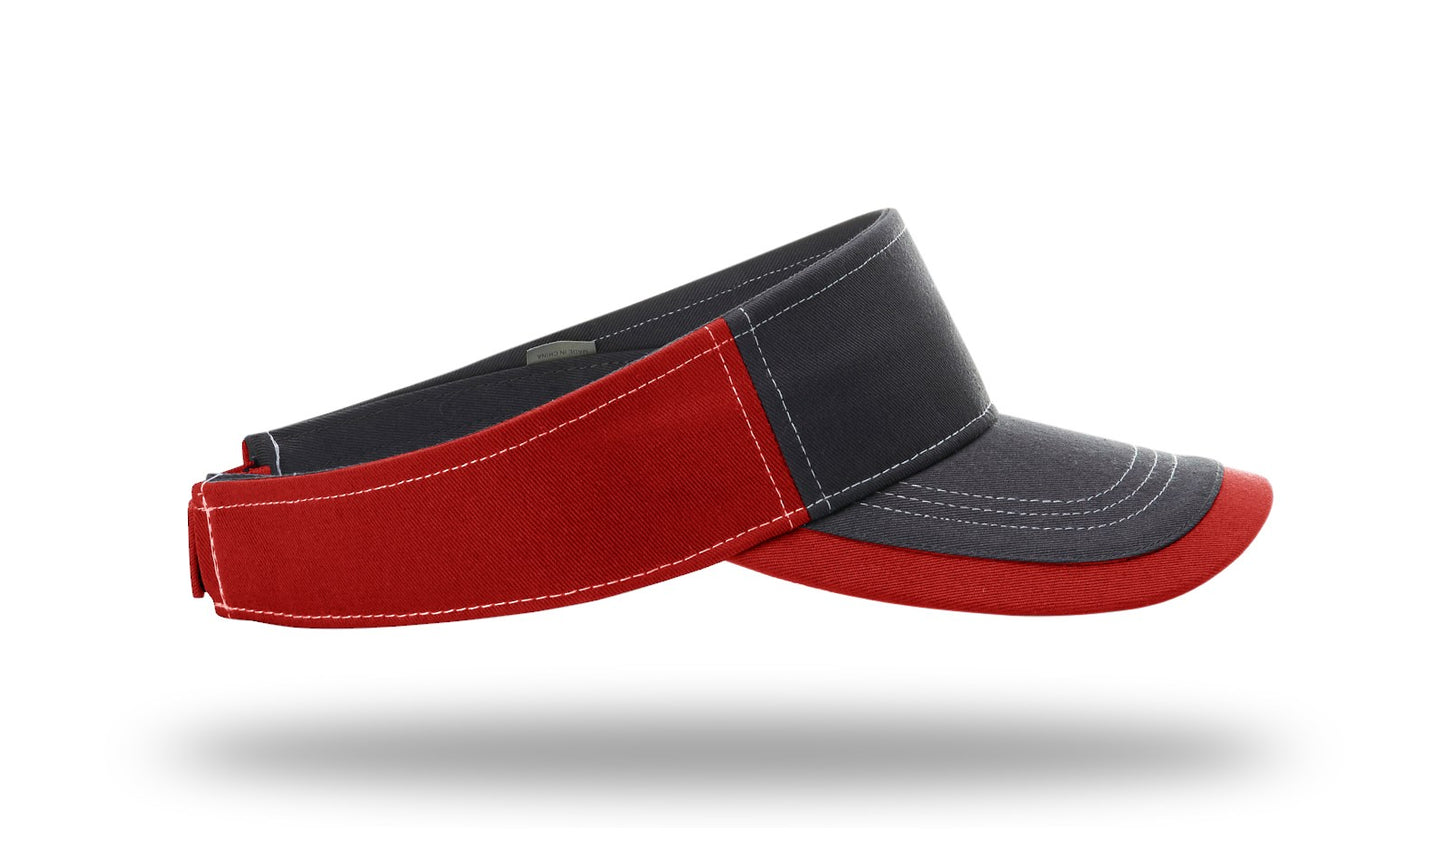 R - 775 Twill Contrast Visors - Charcoal/Red